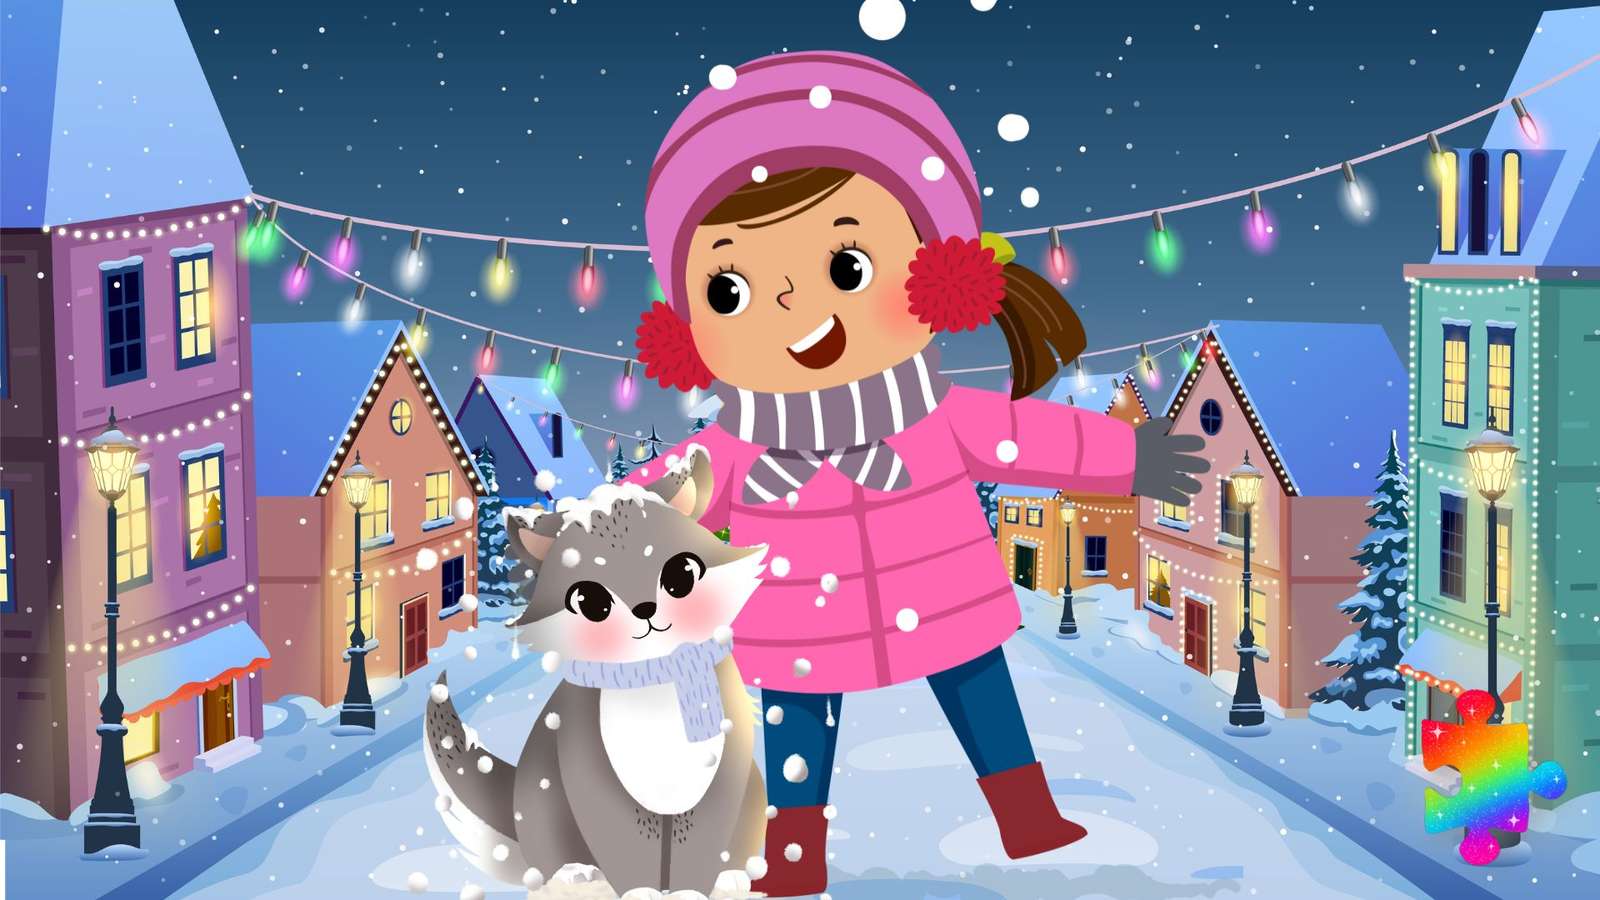 Fun on a snowy evening puzzle online